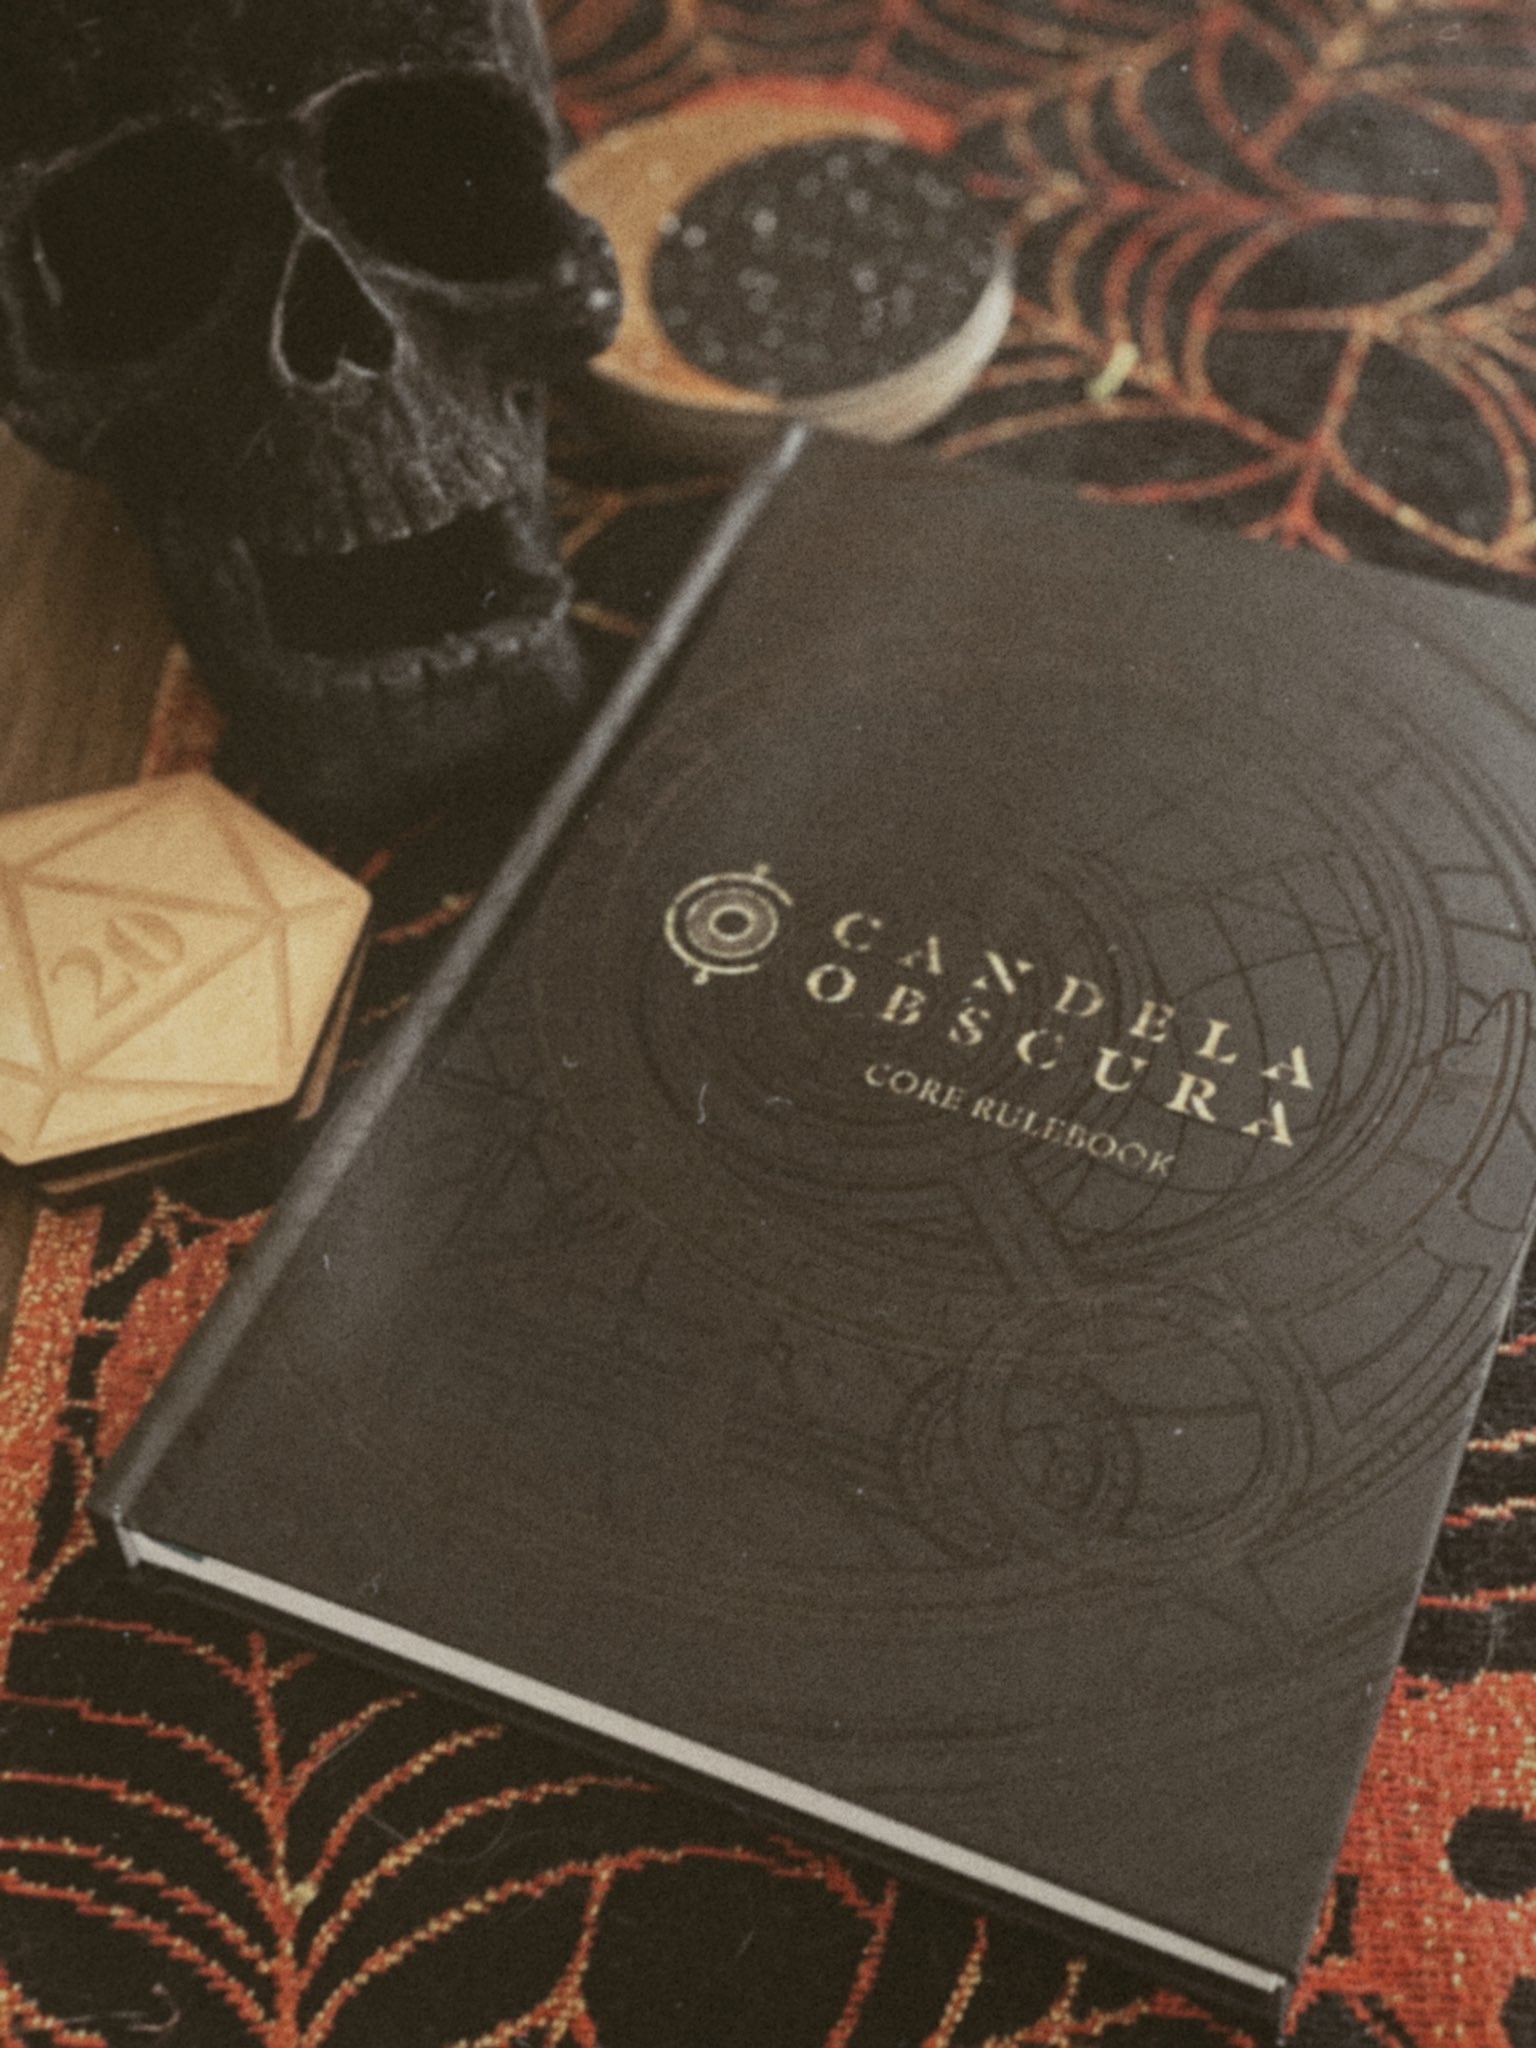 Candela Obscura Core Rulebook - Standard Edition - Bards & Cards